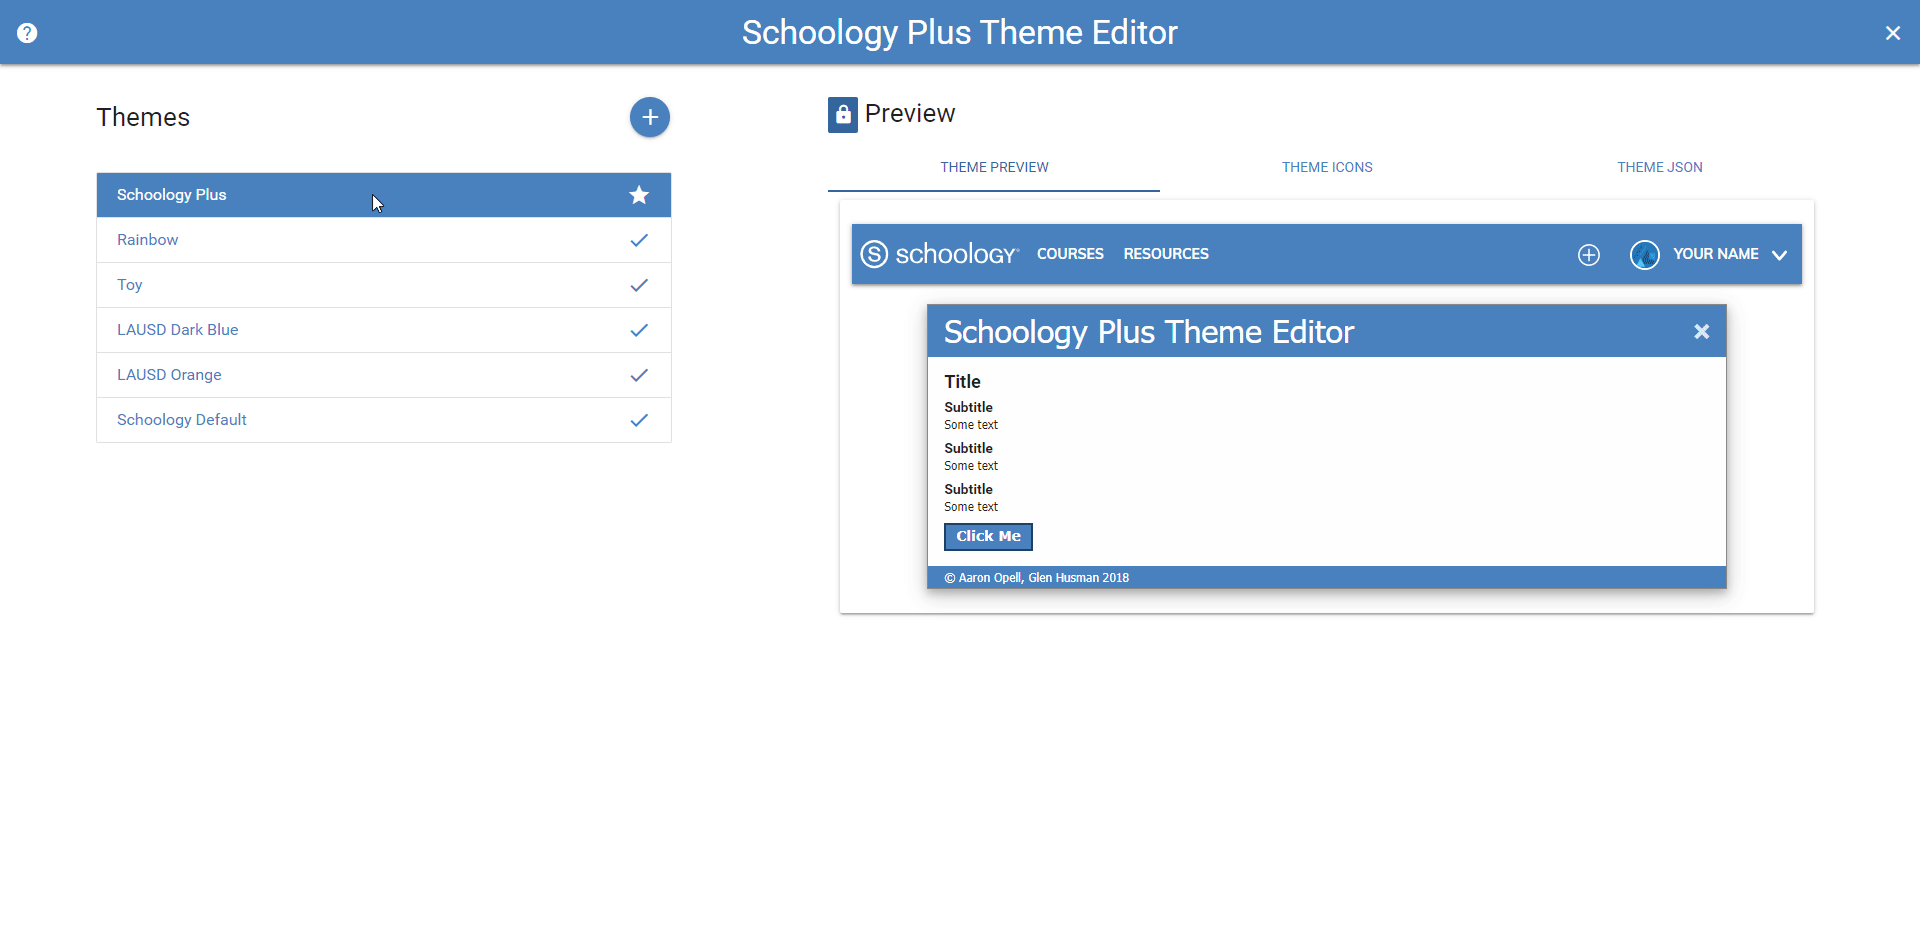 Built-in Themes